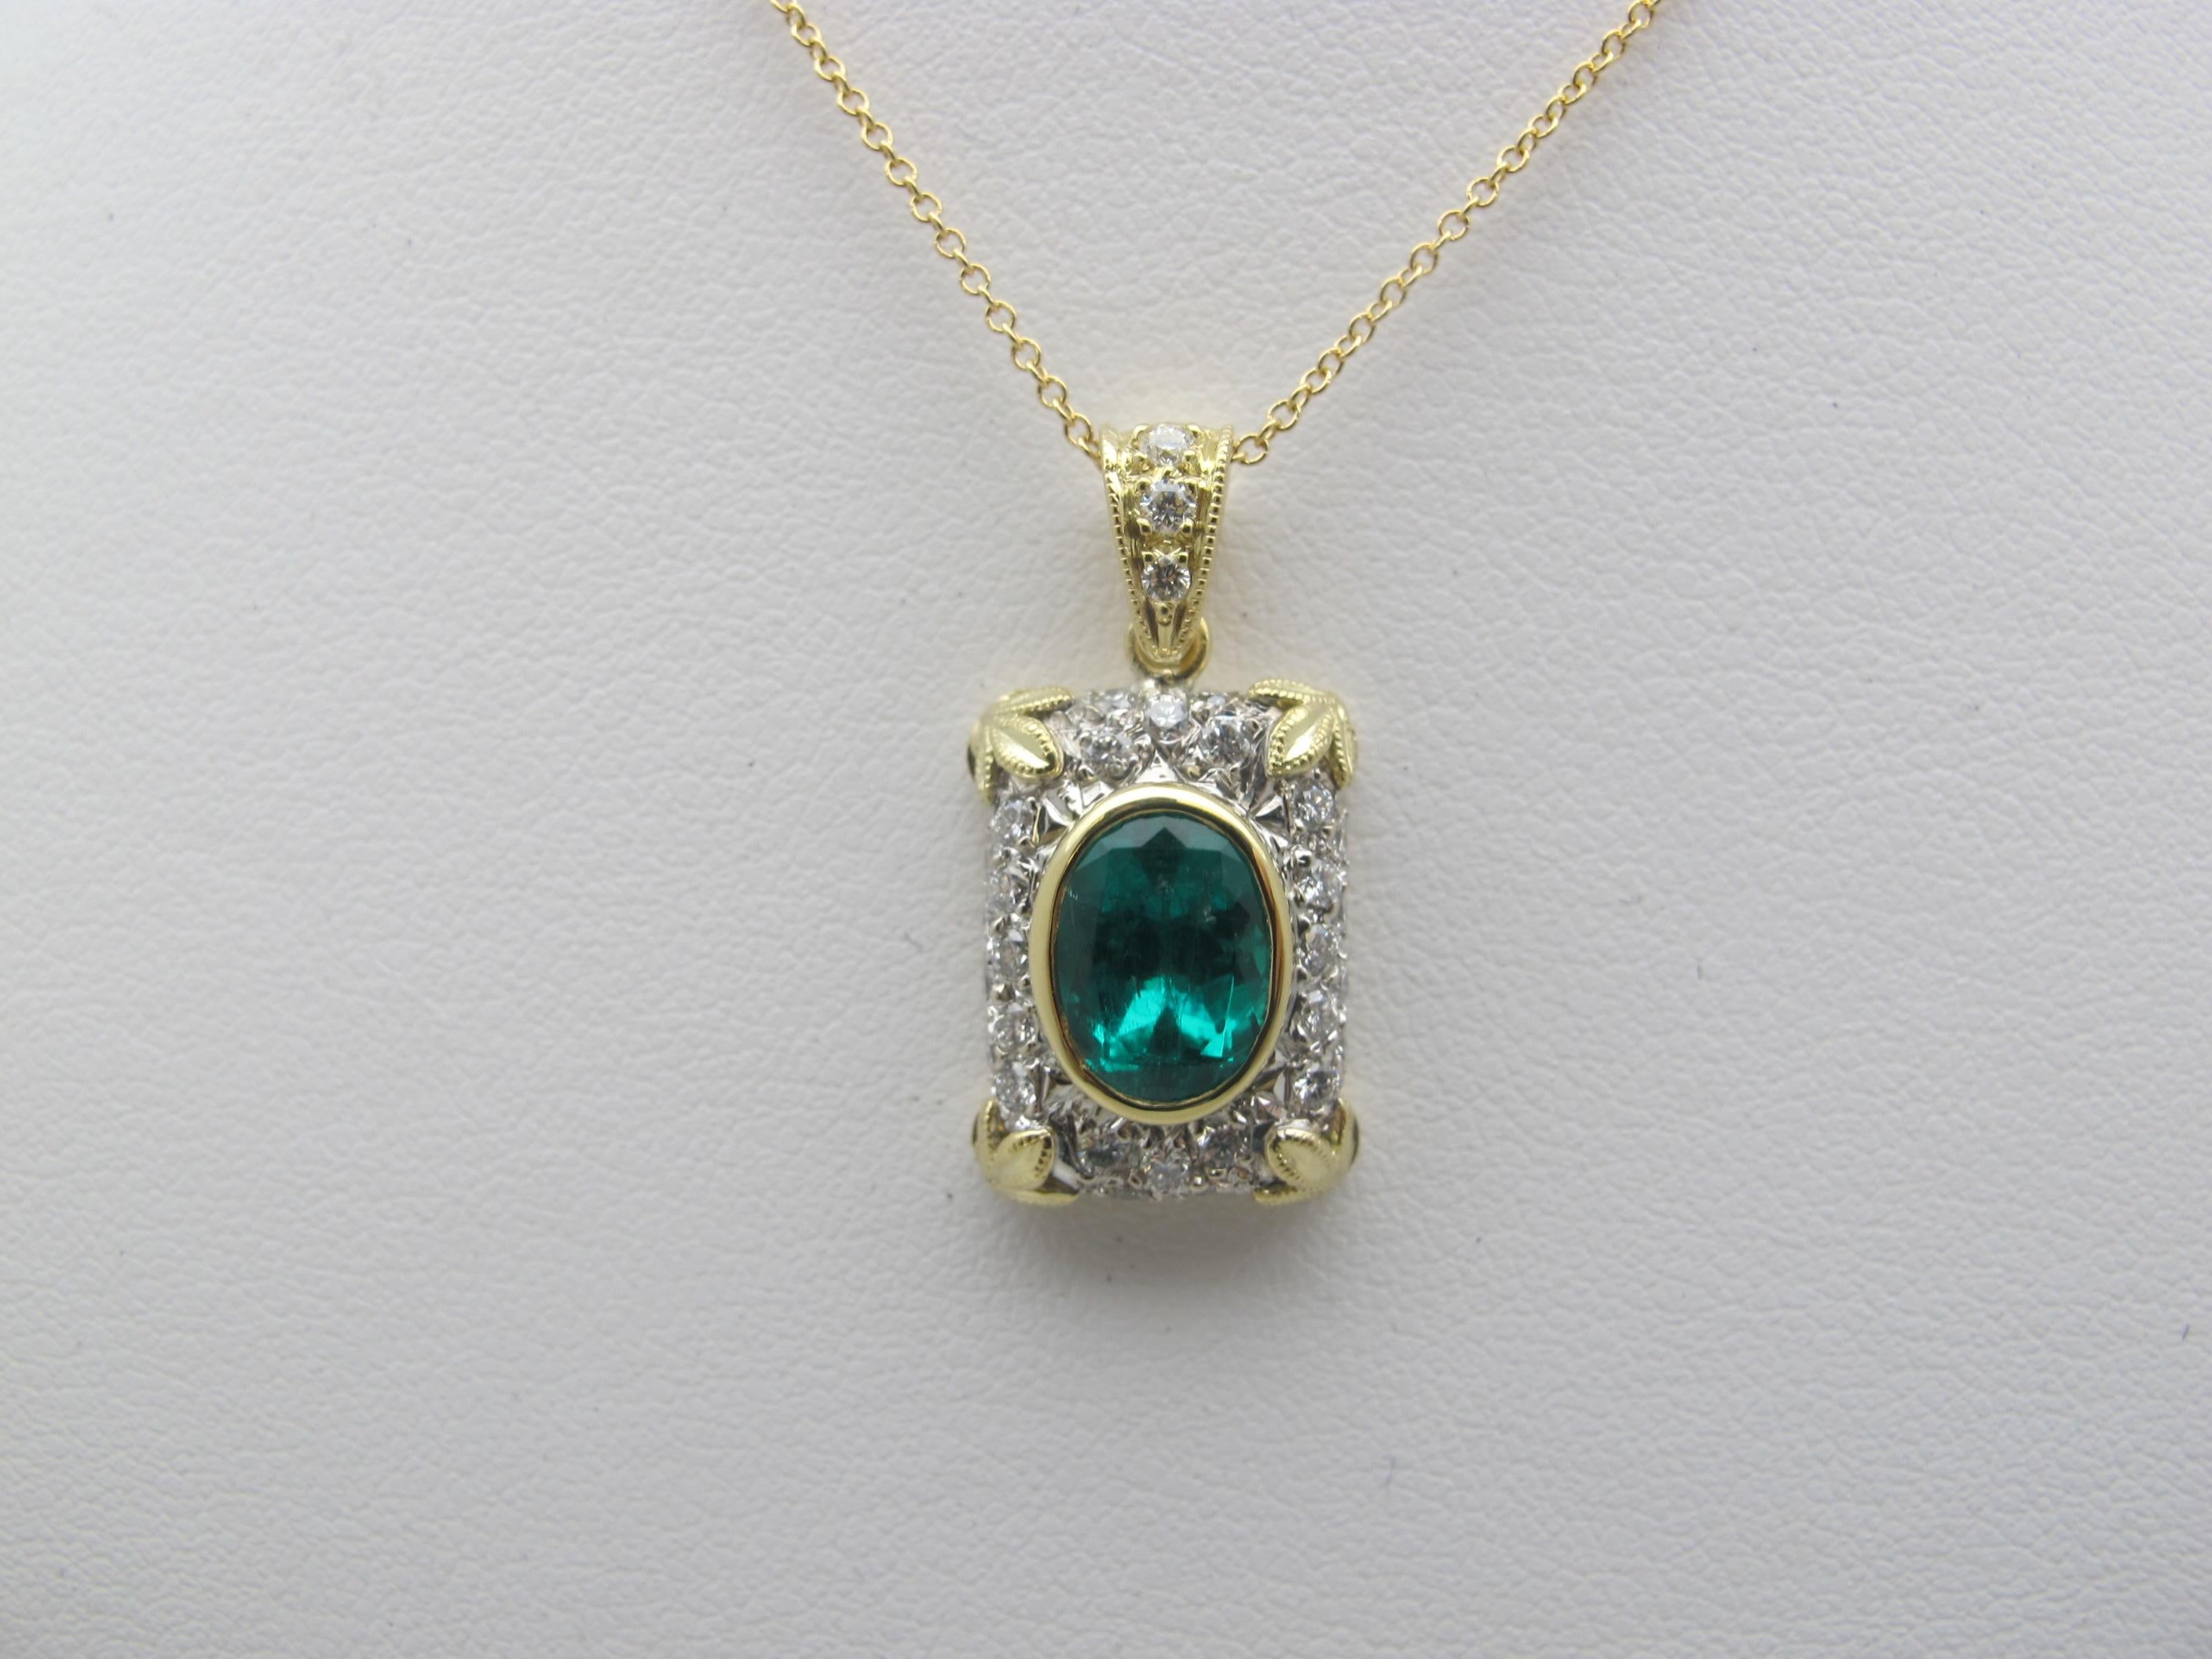 This beautiful pendant features a bright and sparkling oval emerald of mesmerizing color! Handmade in 18k yellow and white gold by our Master Jewelers in Los Angeles, this piece displays a superior level of craftsmanship and attention to detail that